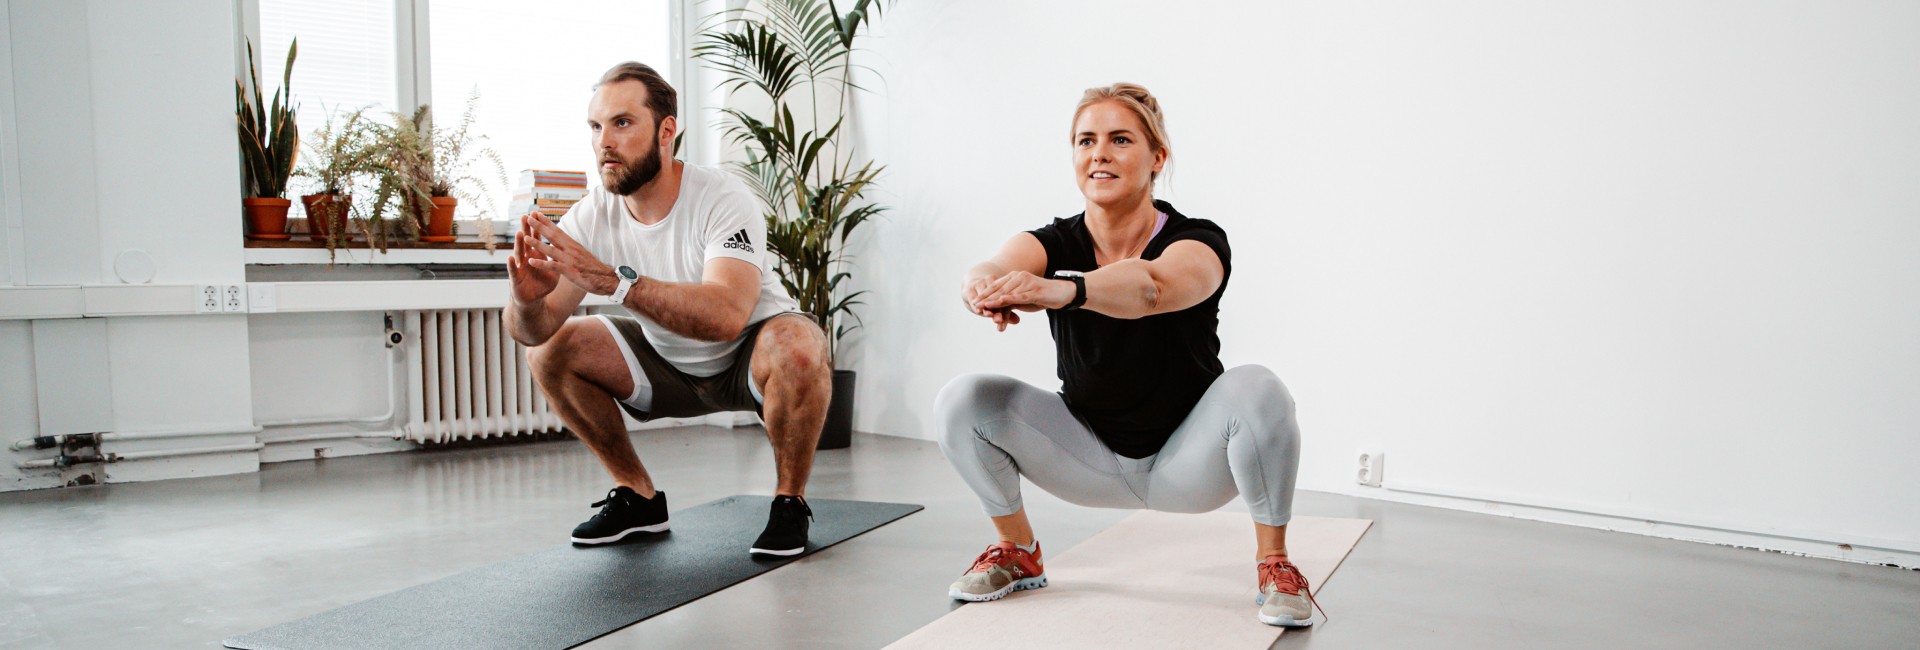 Get LIIT With Low-intensity Interval Training